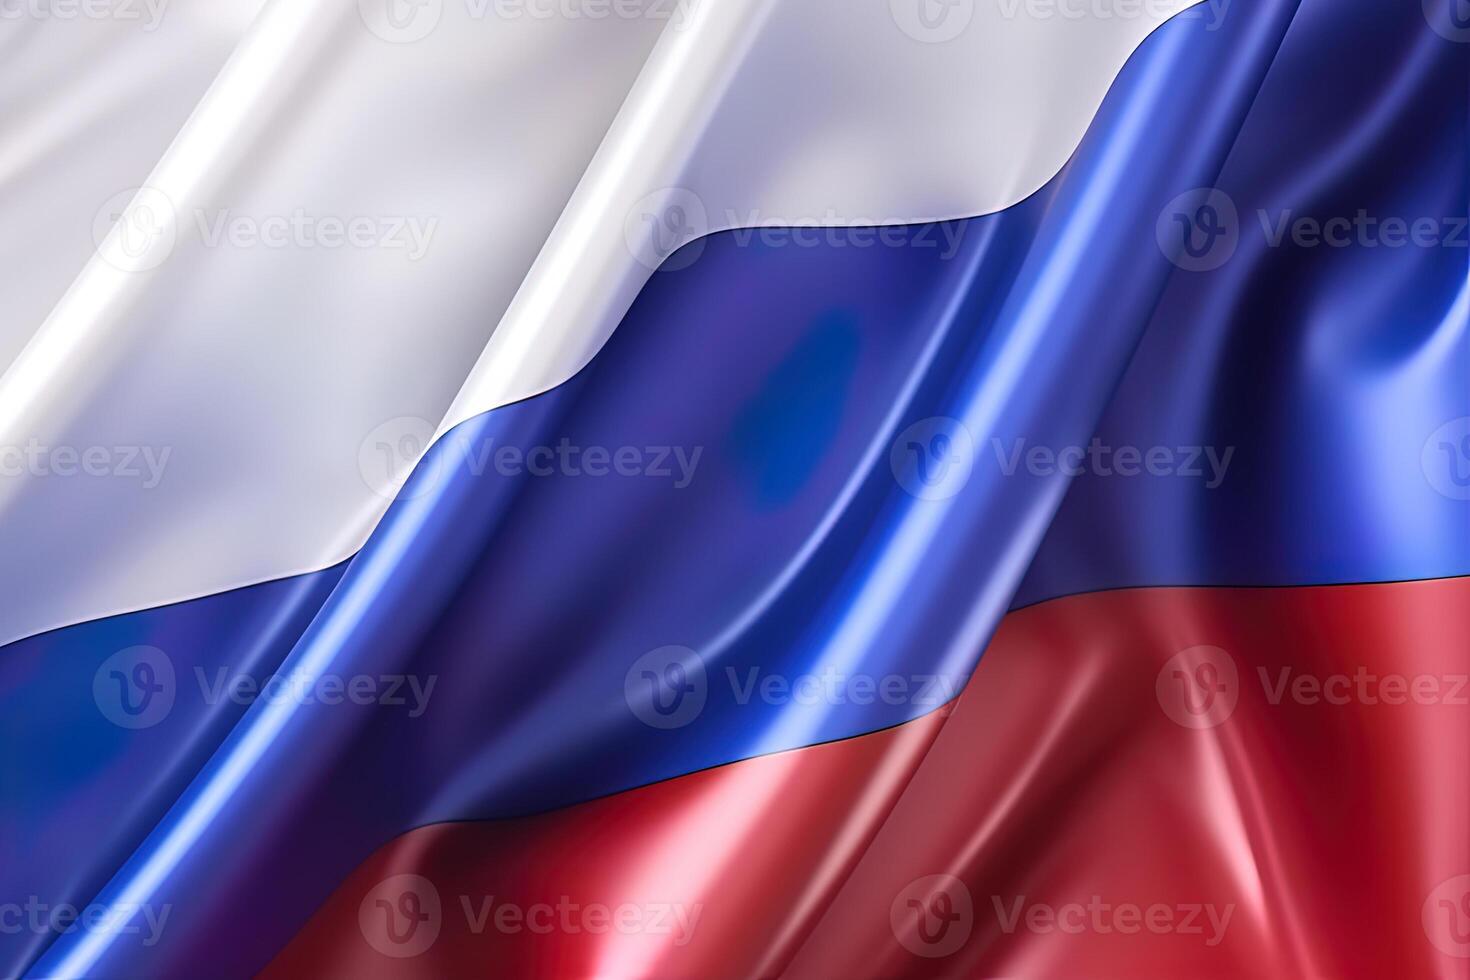 white, blue and red background, waving the national flag of Russia, waved a highly detailed close-up. photo